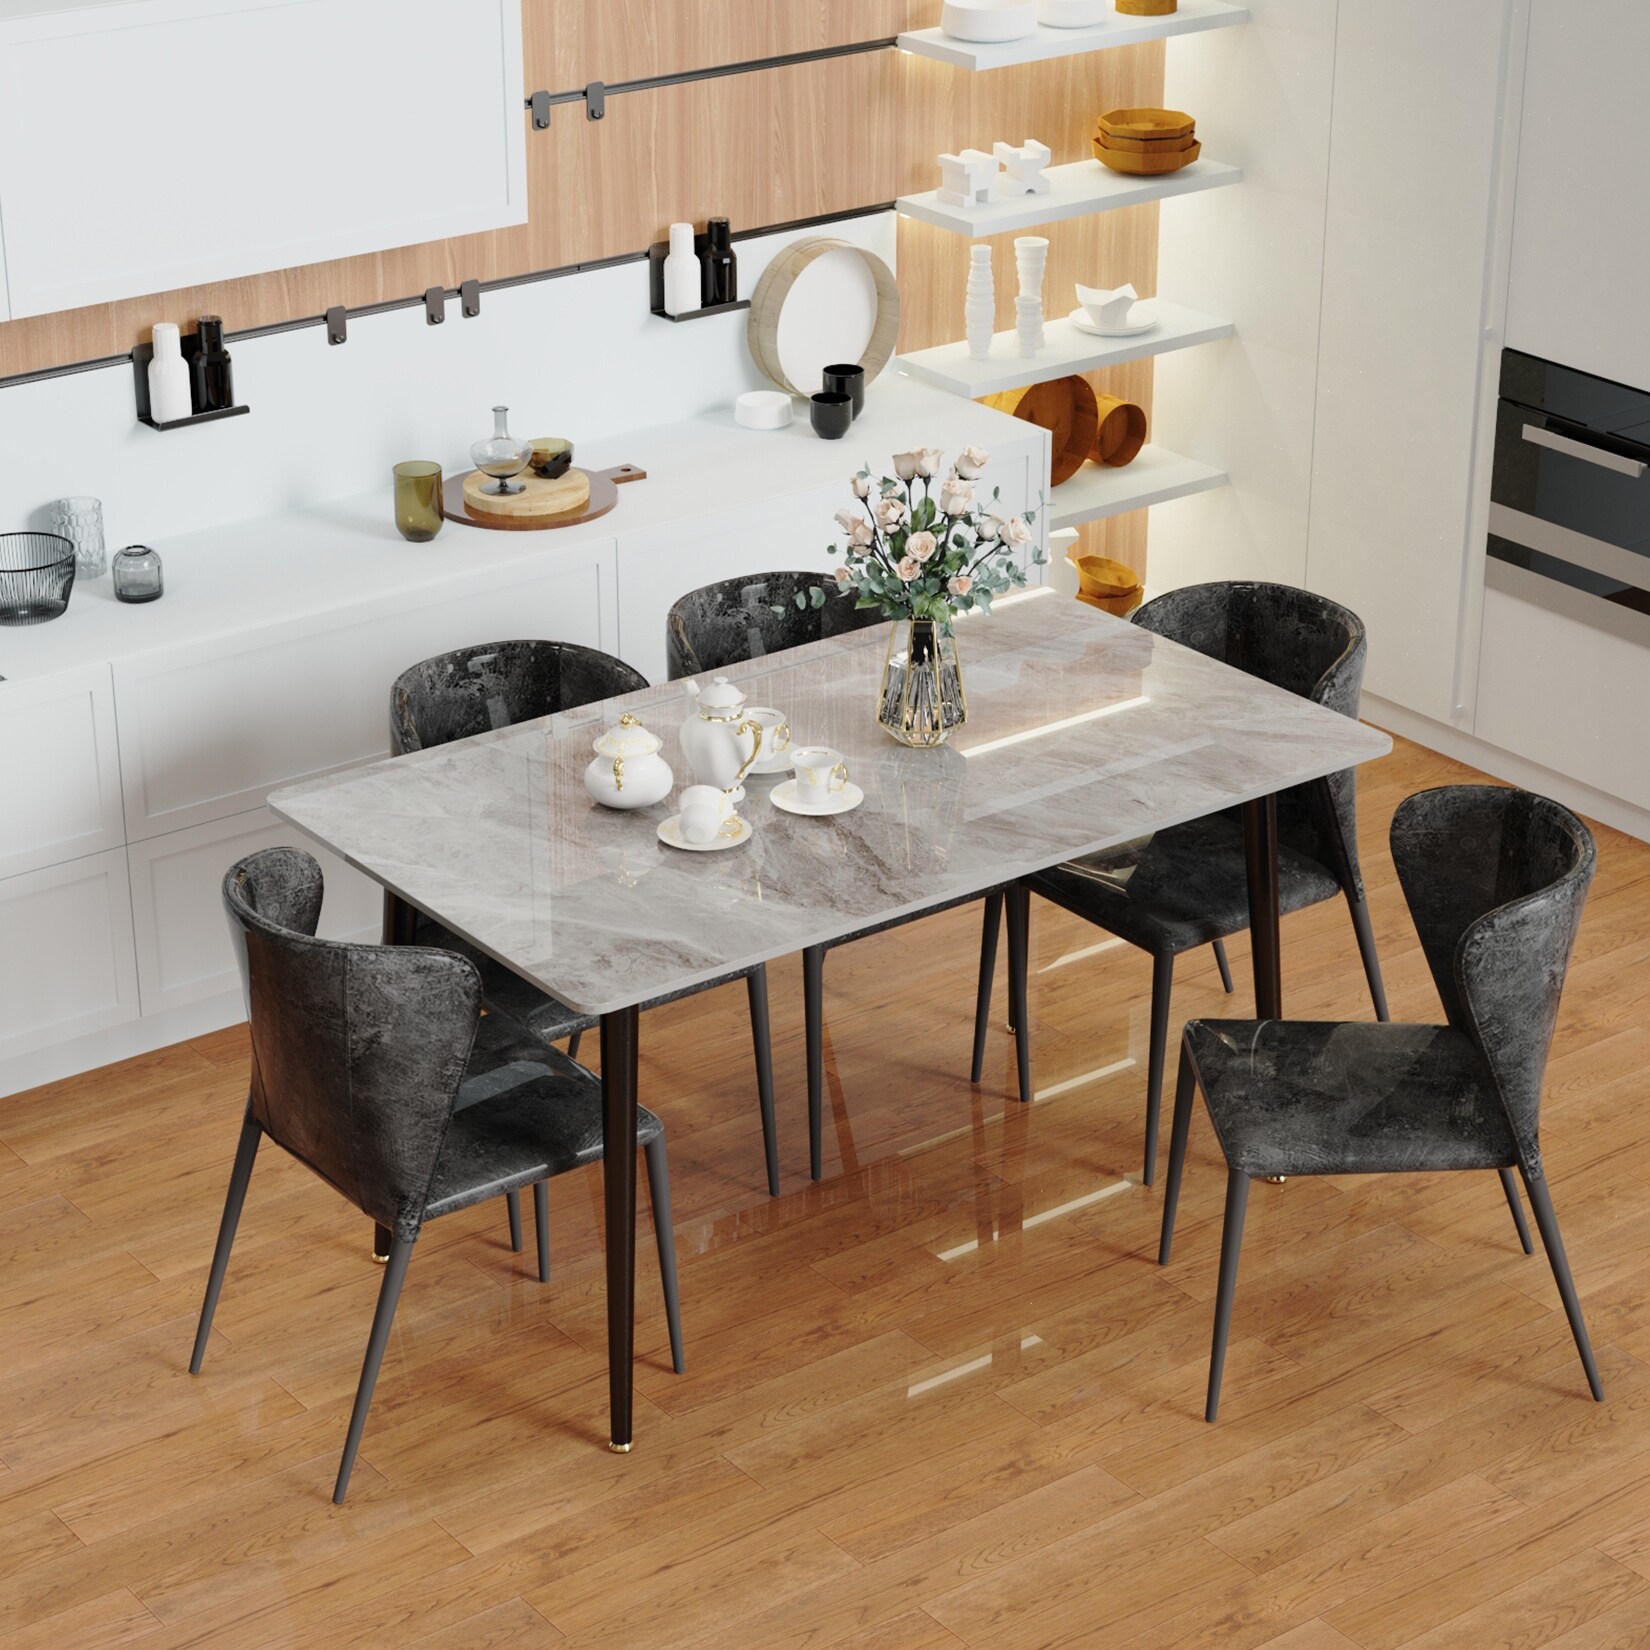 https://ak1.ostkcdn.com/images/products/is/images/direct/552f4c1e7f63e6d606279fdda408bef879ebf7c0/6-Seater-Kitchen-Dining-Table-Modern-Marble-Tabletop-Rectangular-with-Tapered-Metal-Legs.jpg